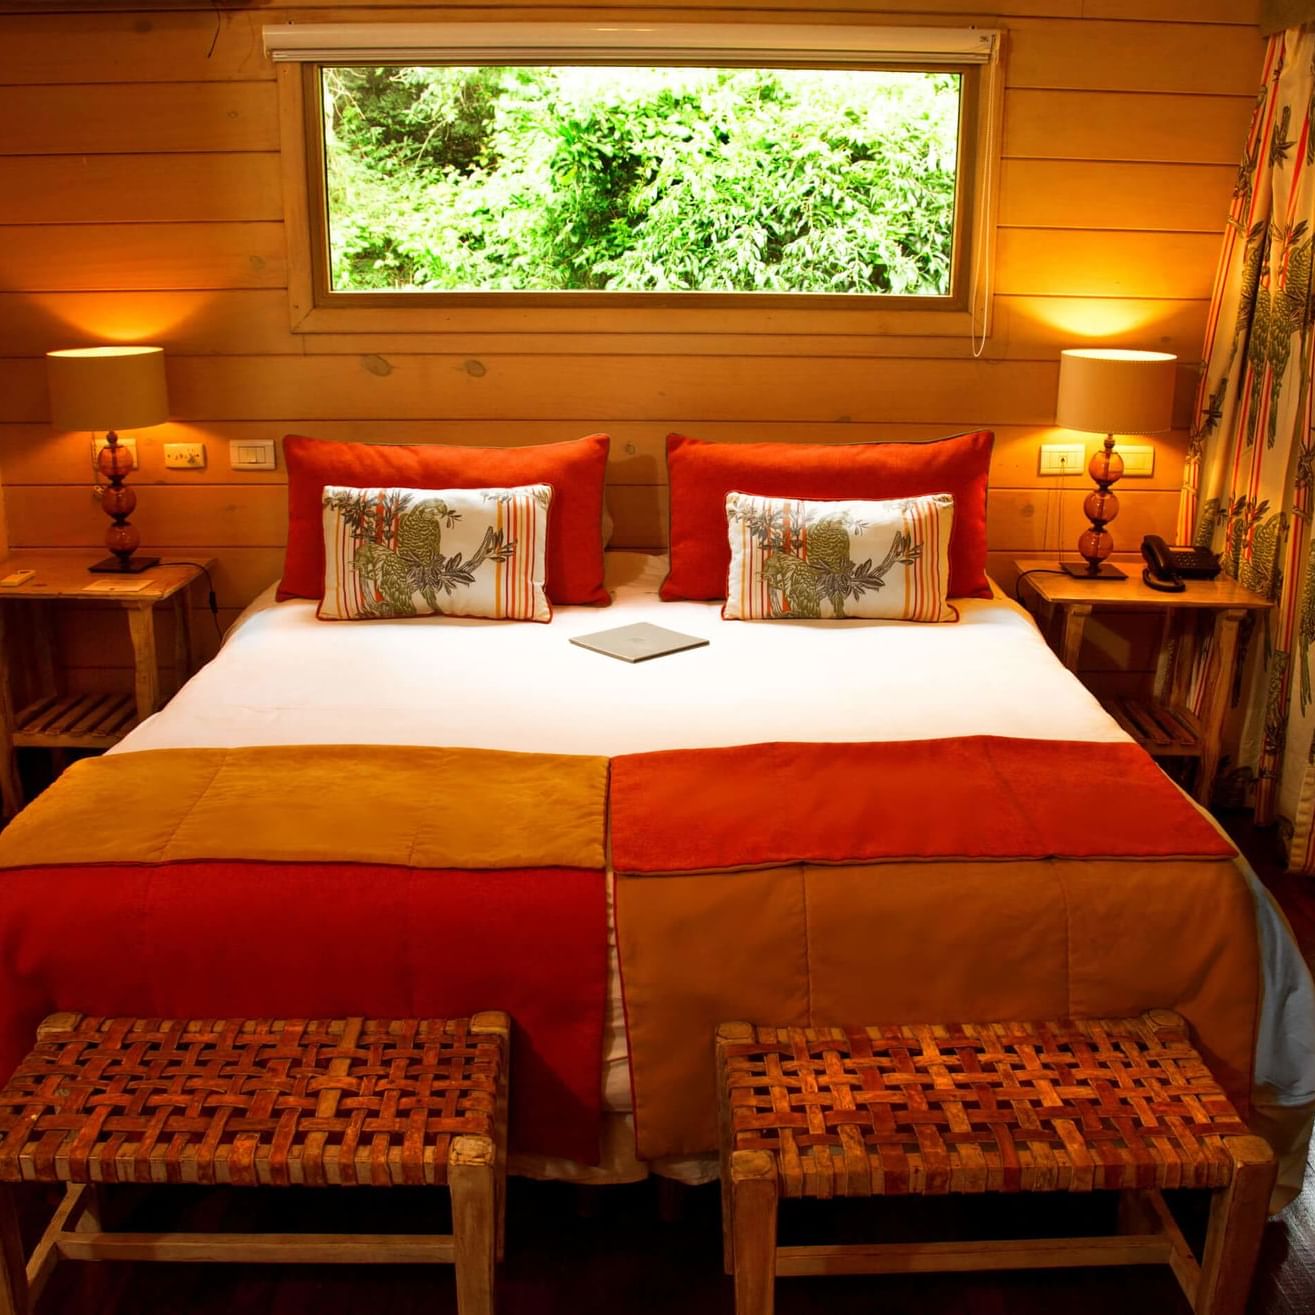 Bed & furniture in the jungle room at DOT Hotels